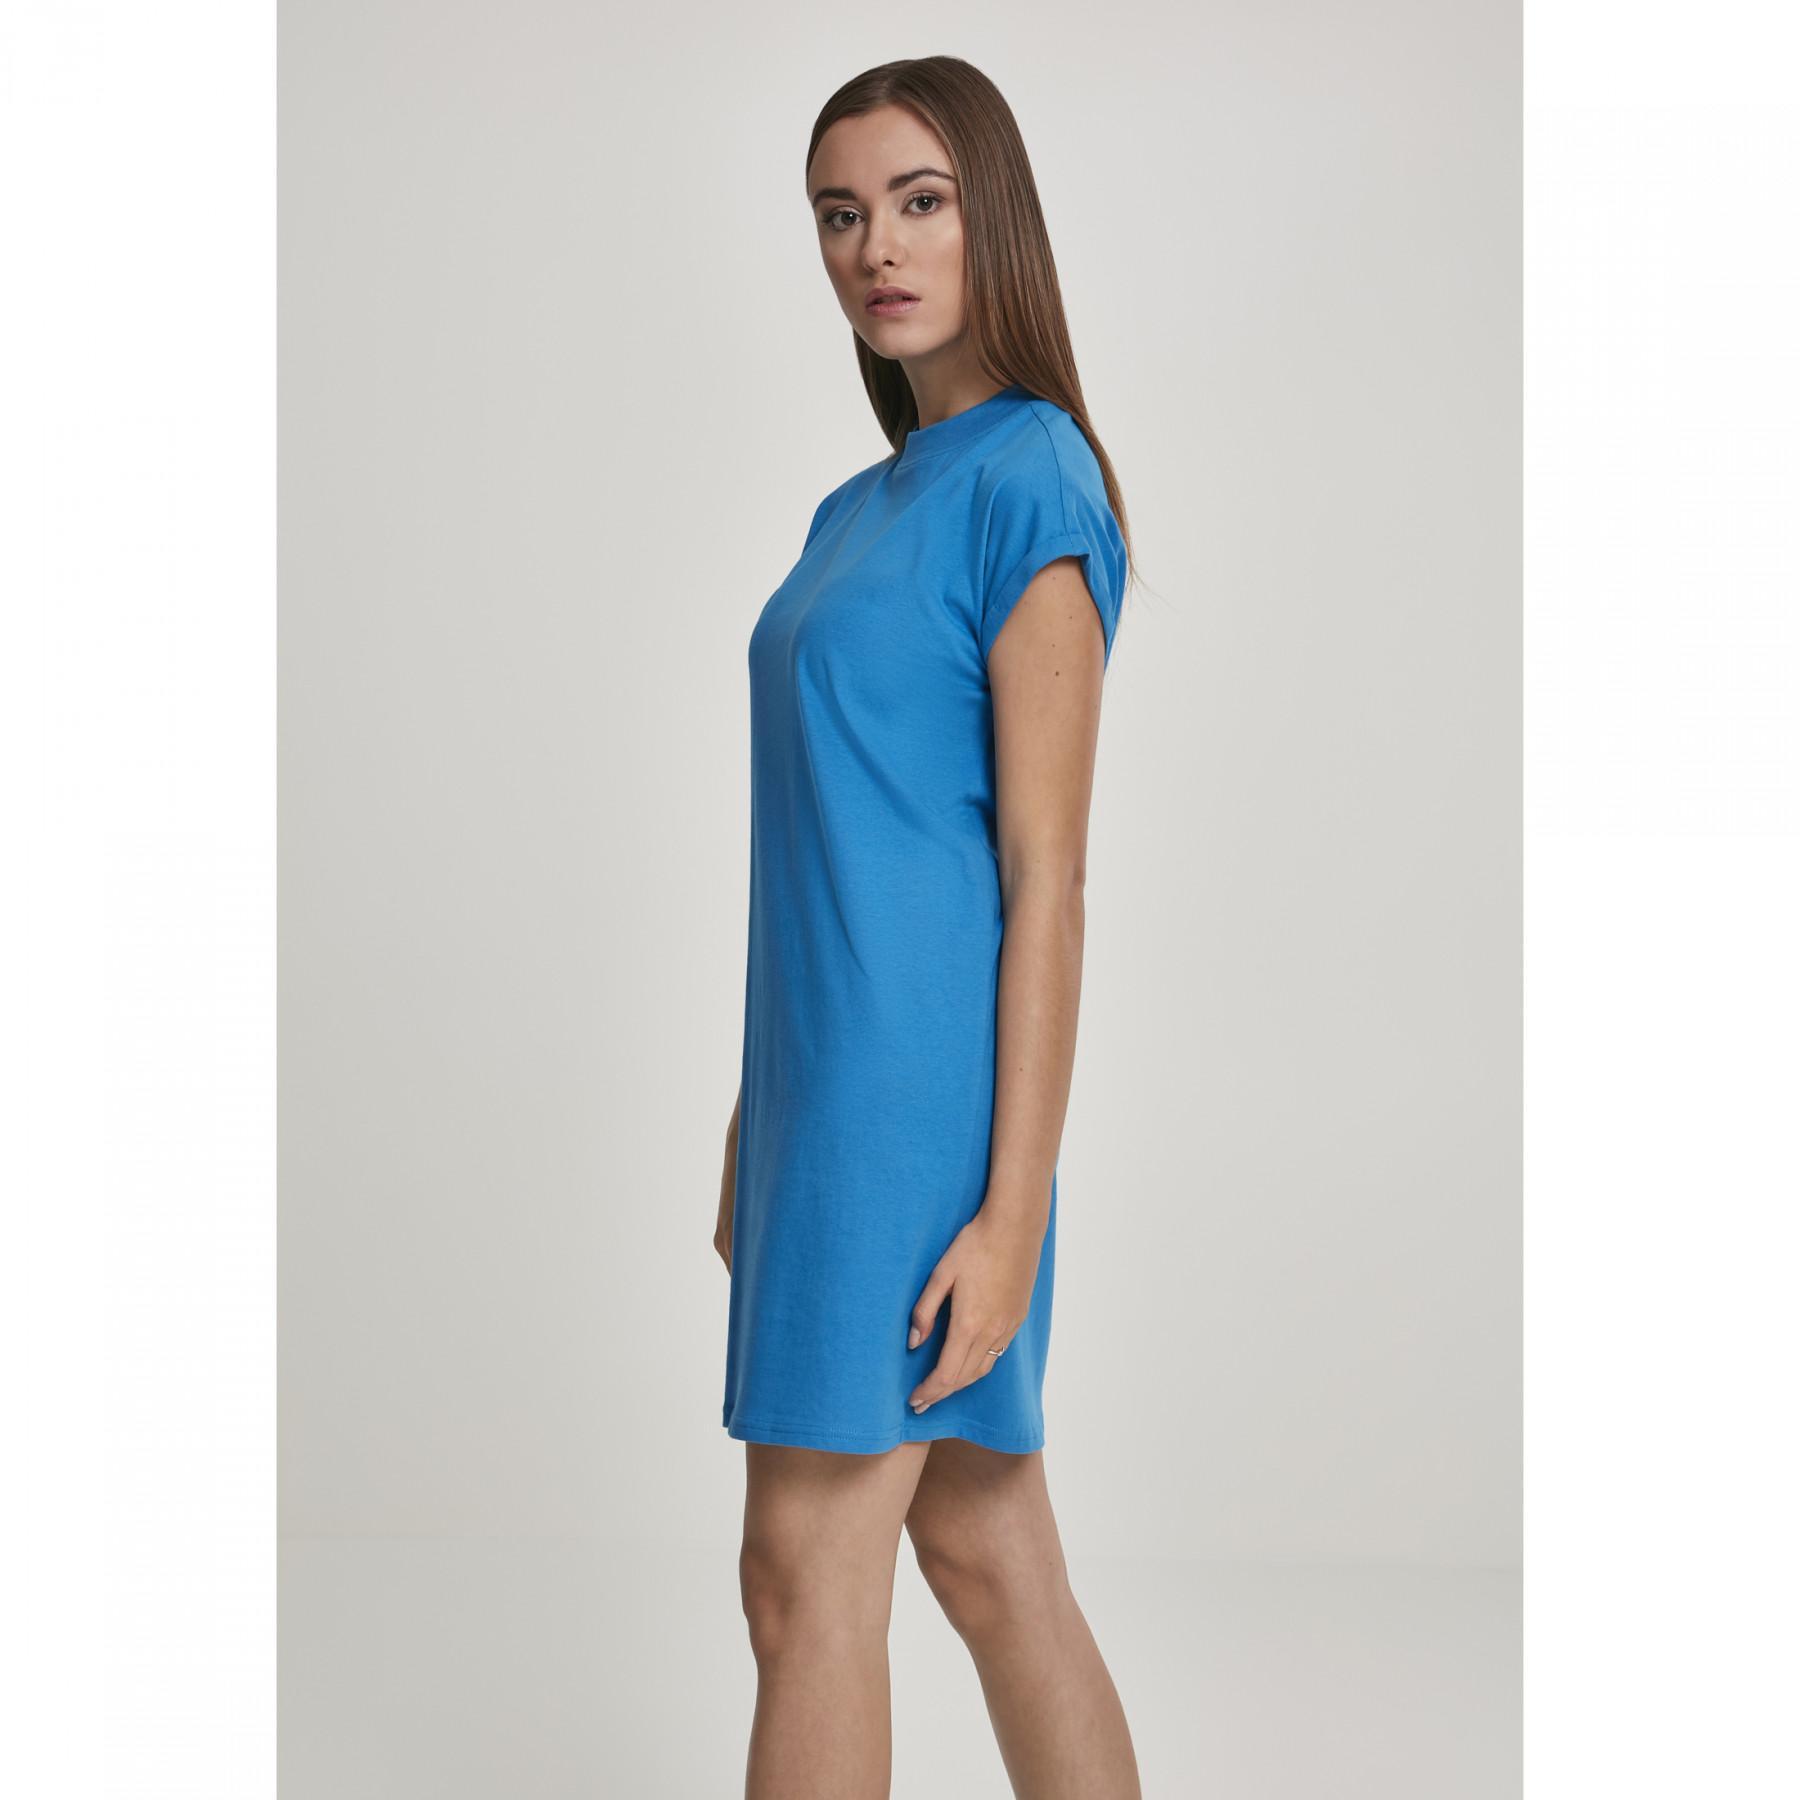 Women's Urban Classic turtle extended GT dress